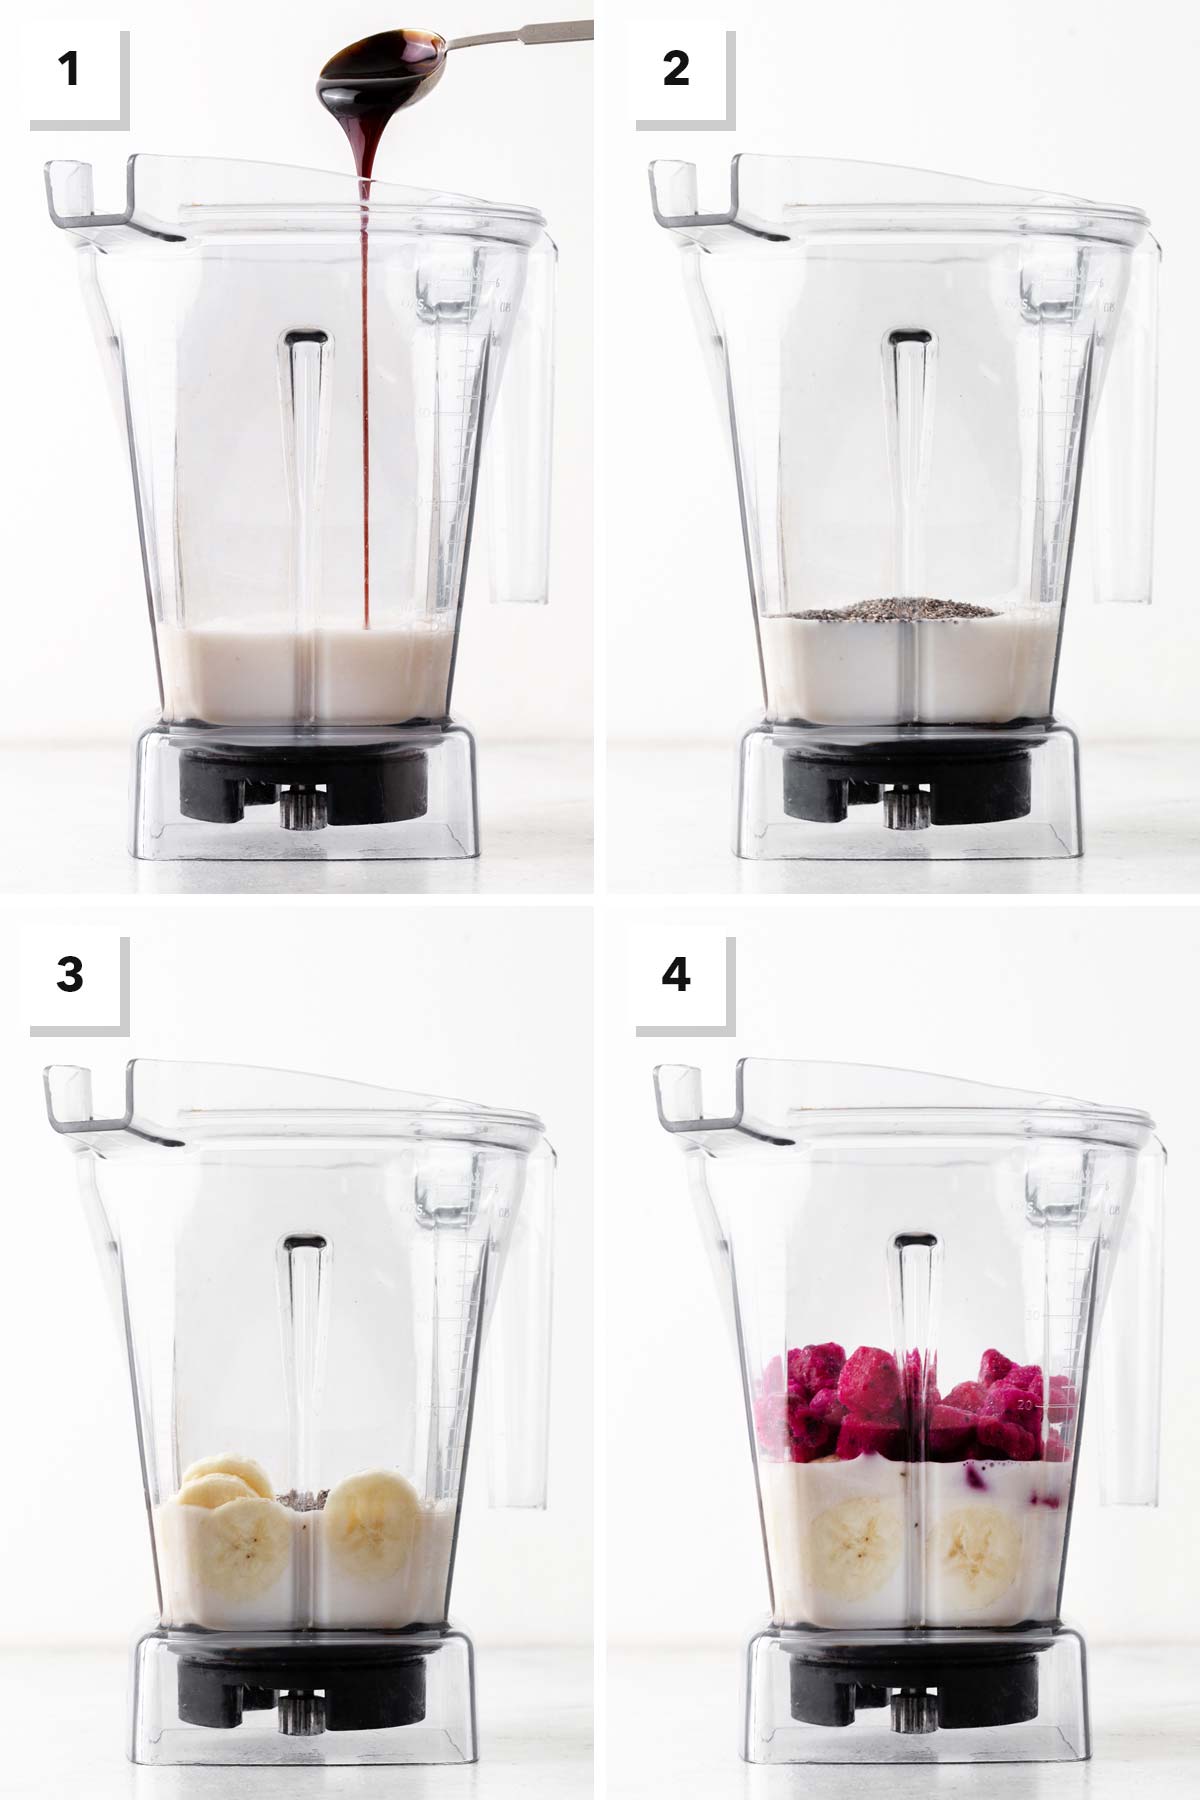 Steps for making a dragon fruit smoothie.